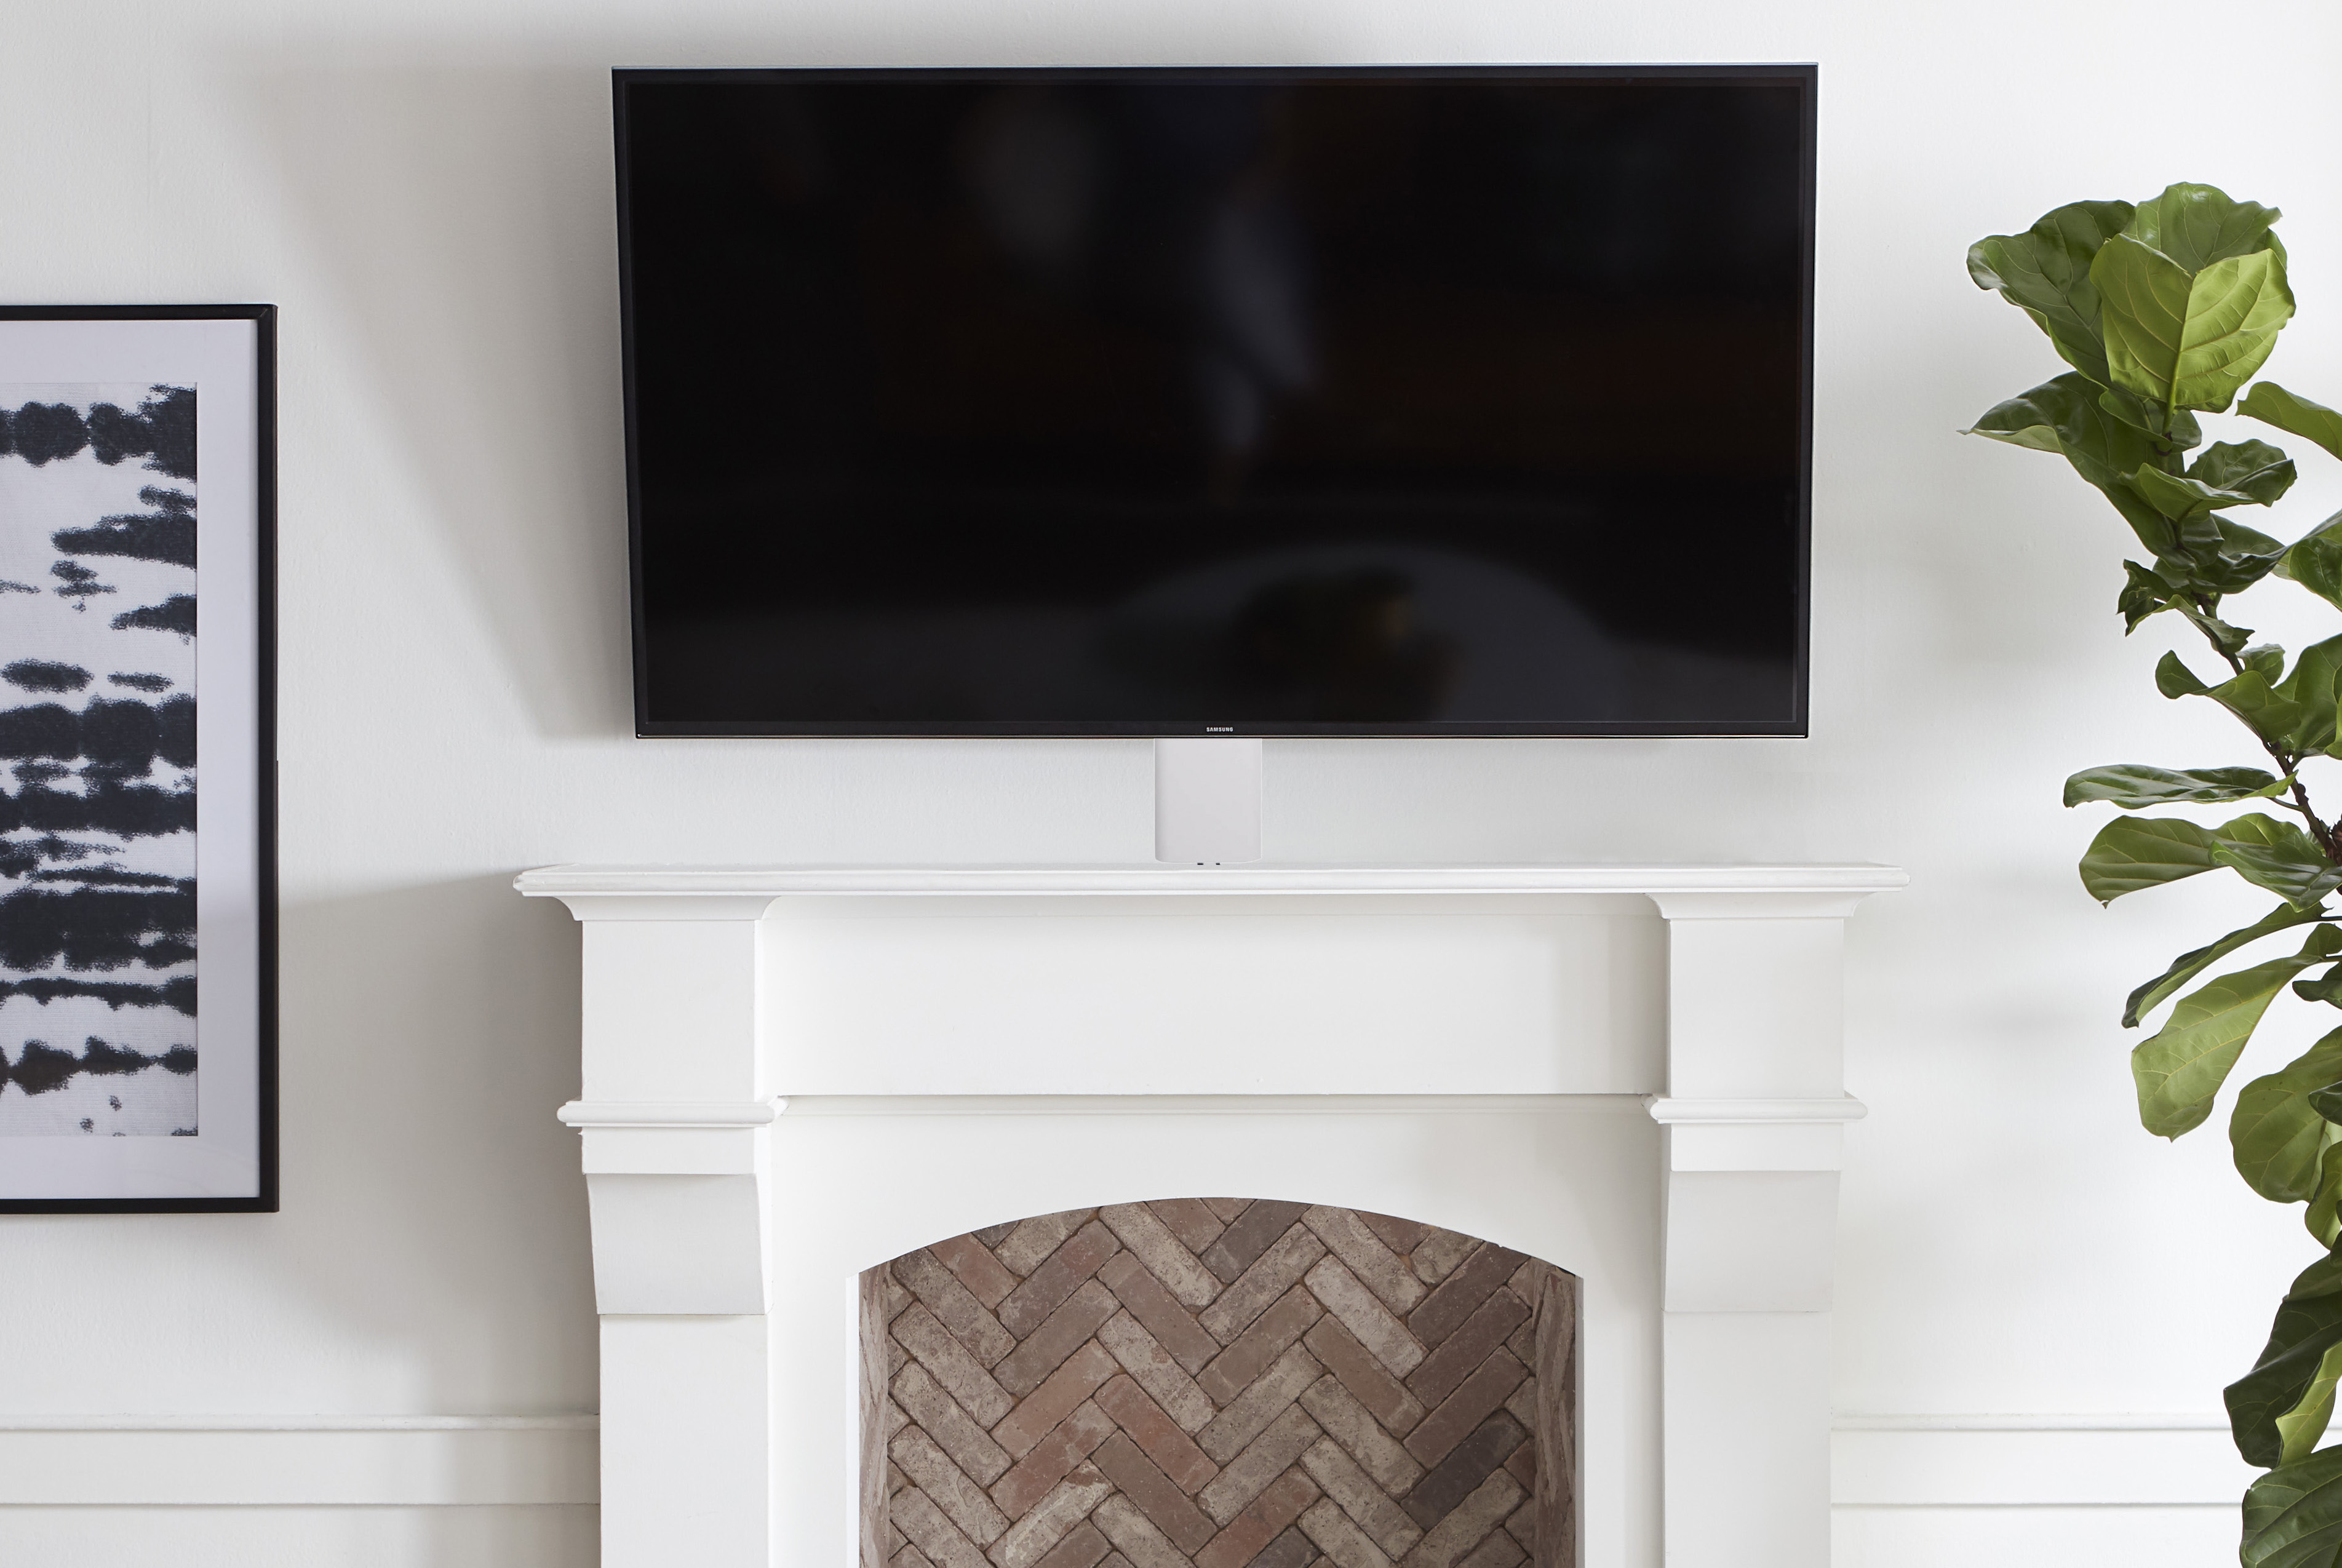 Mounting A Tv Over Fireplace How, Mount Flat Screen Above Fireplace